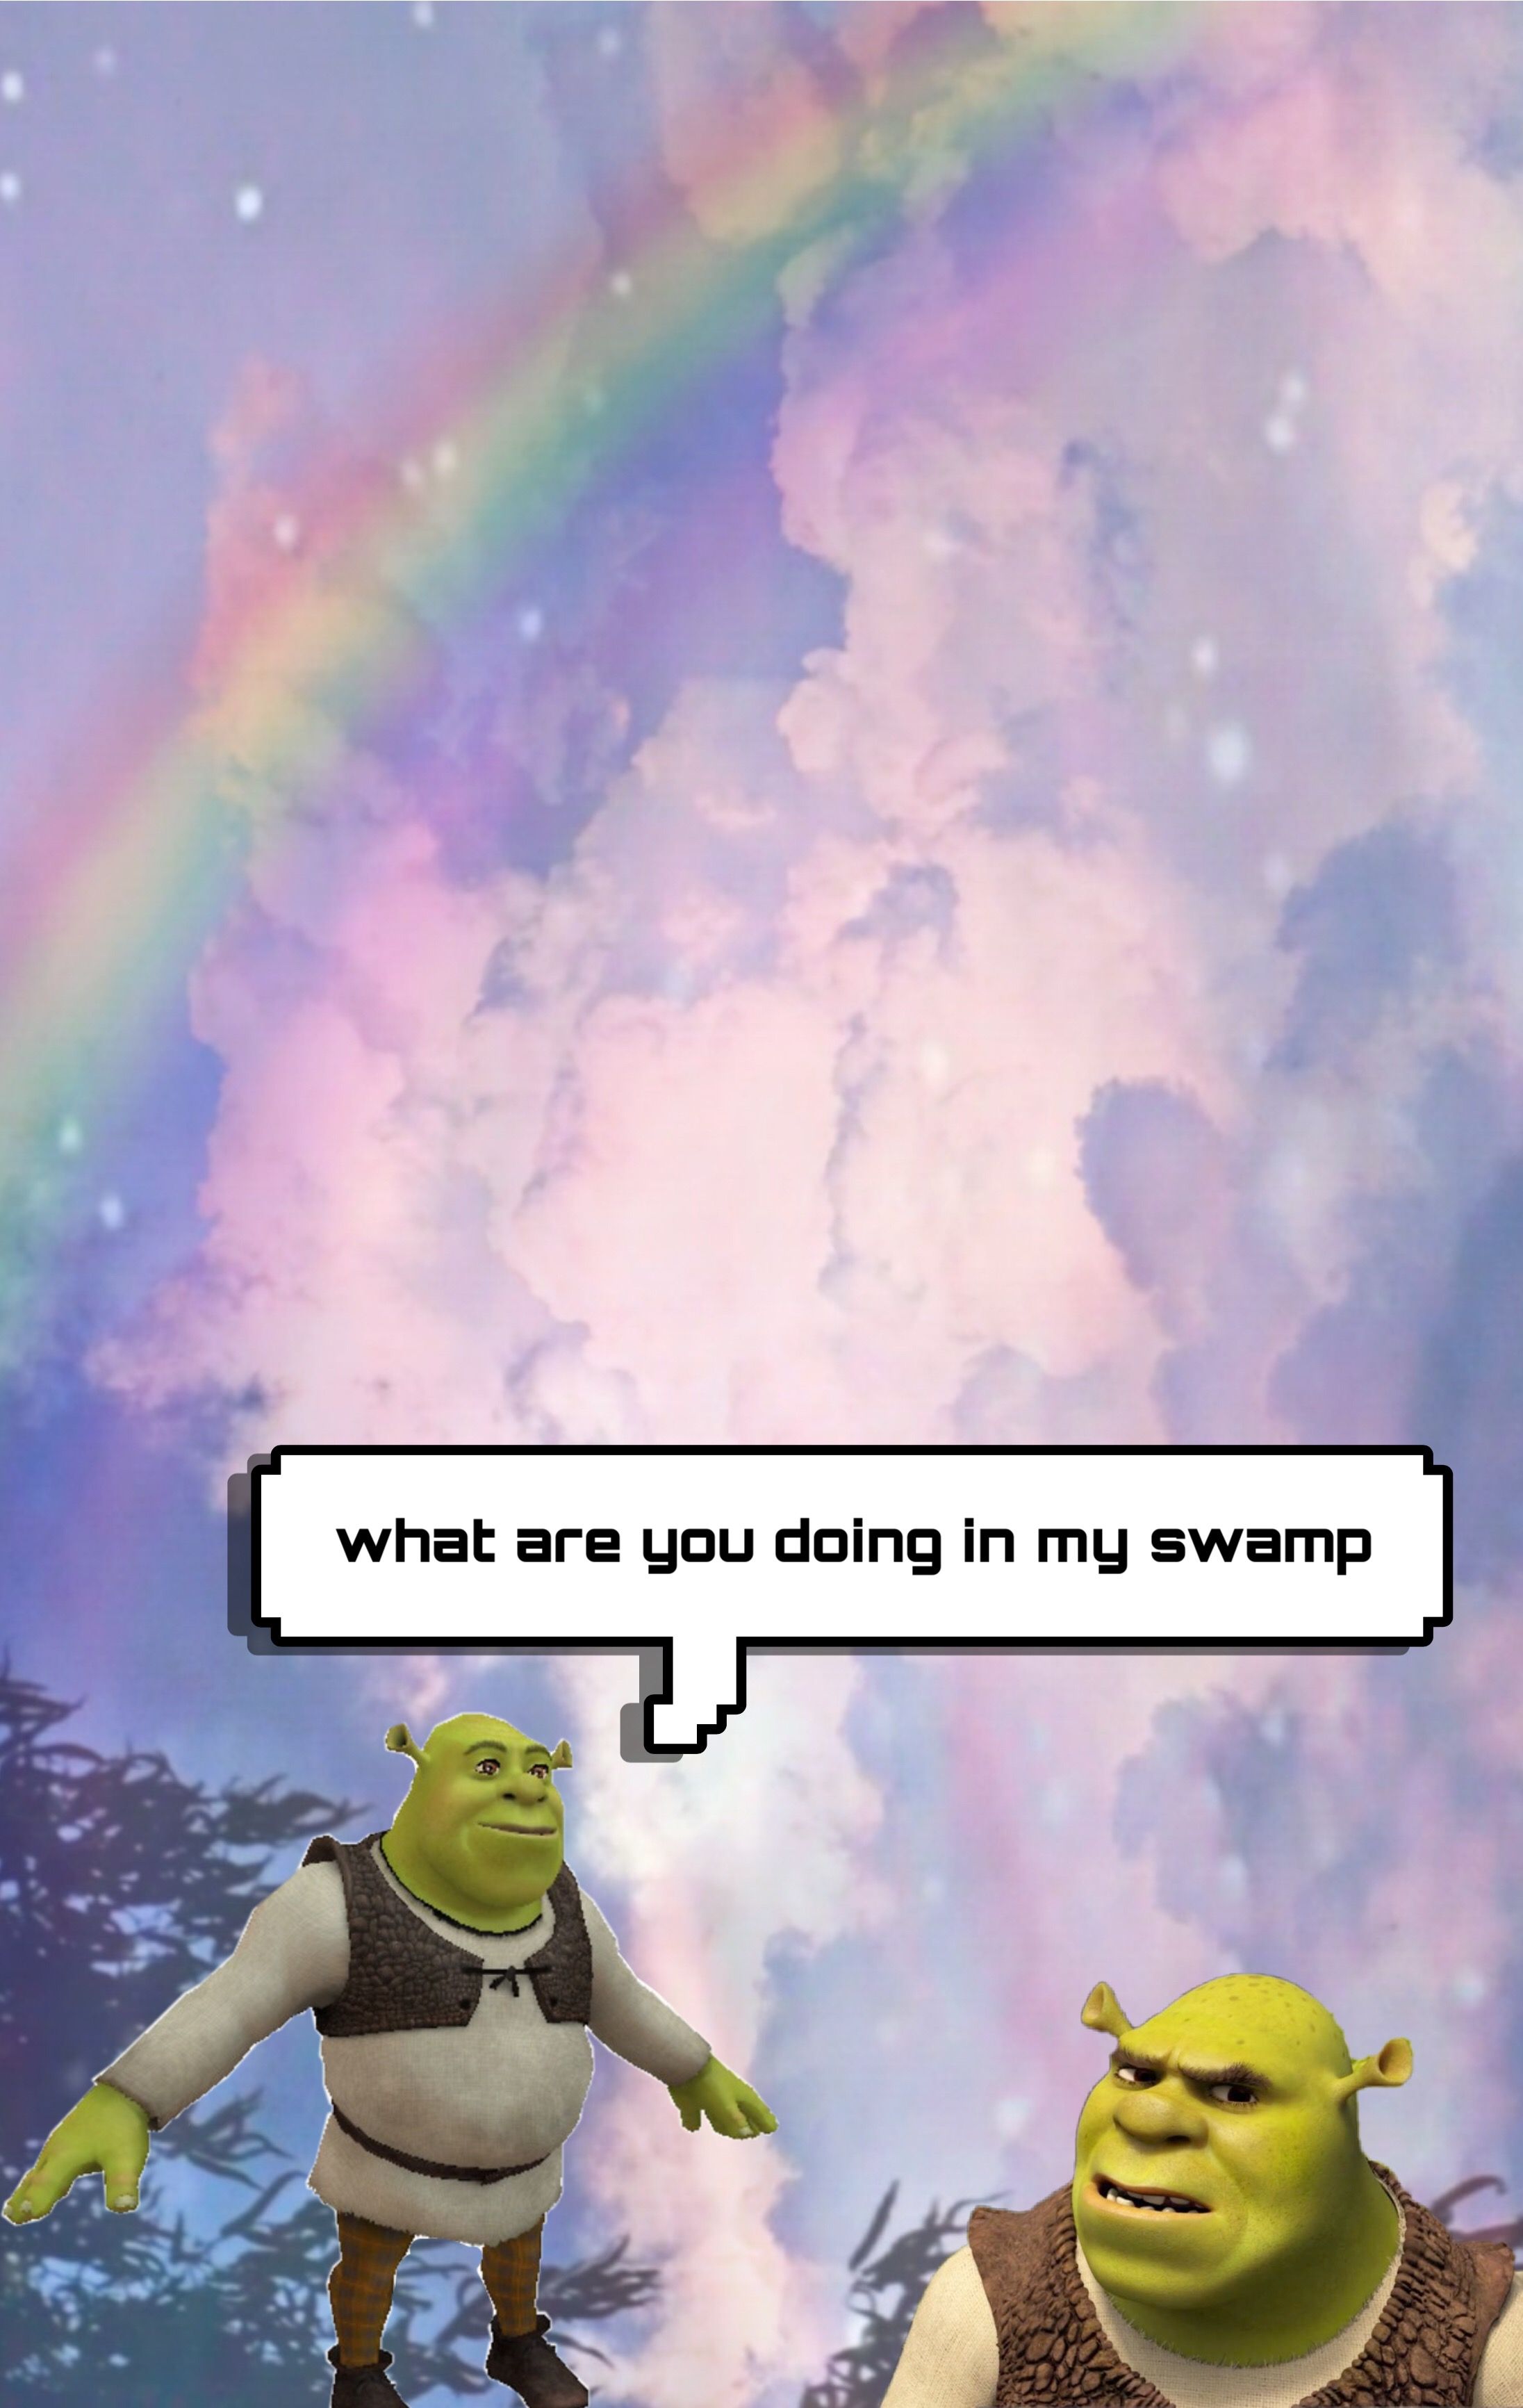 Shrek staring at a swamp monster with a speech bubble that says 